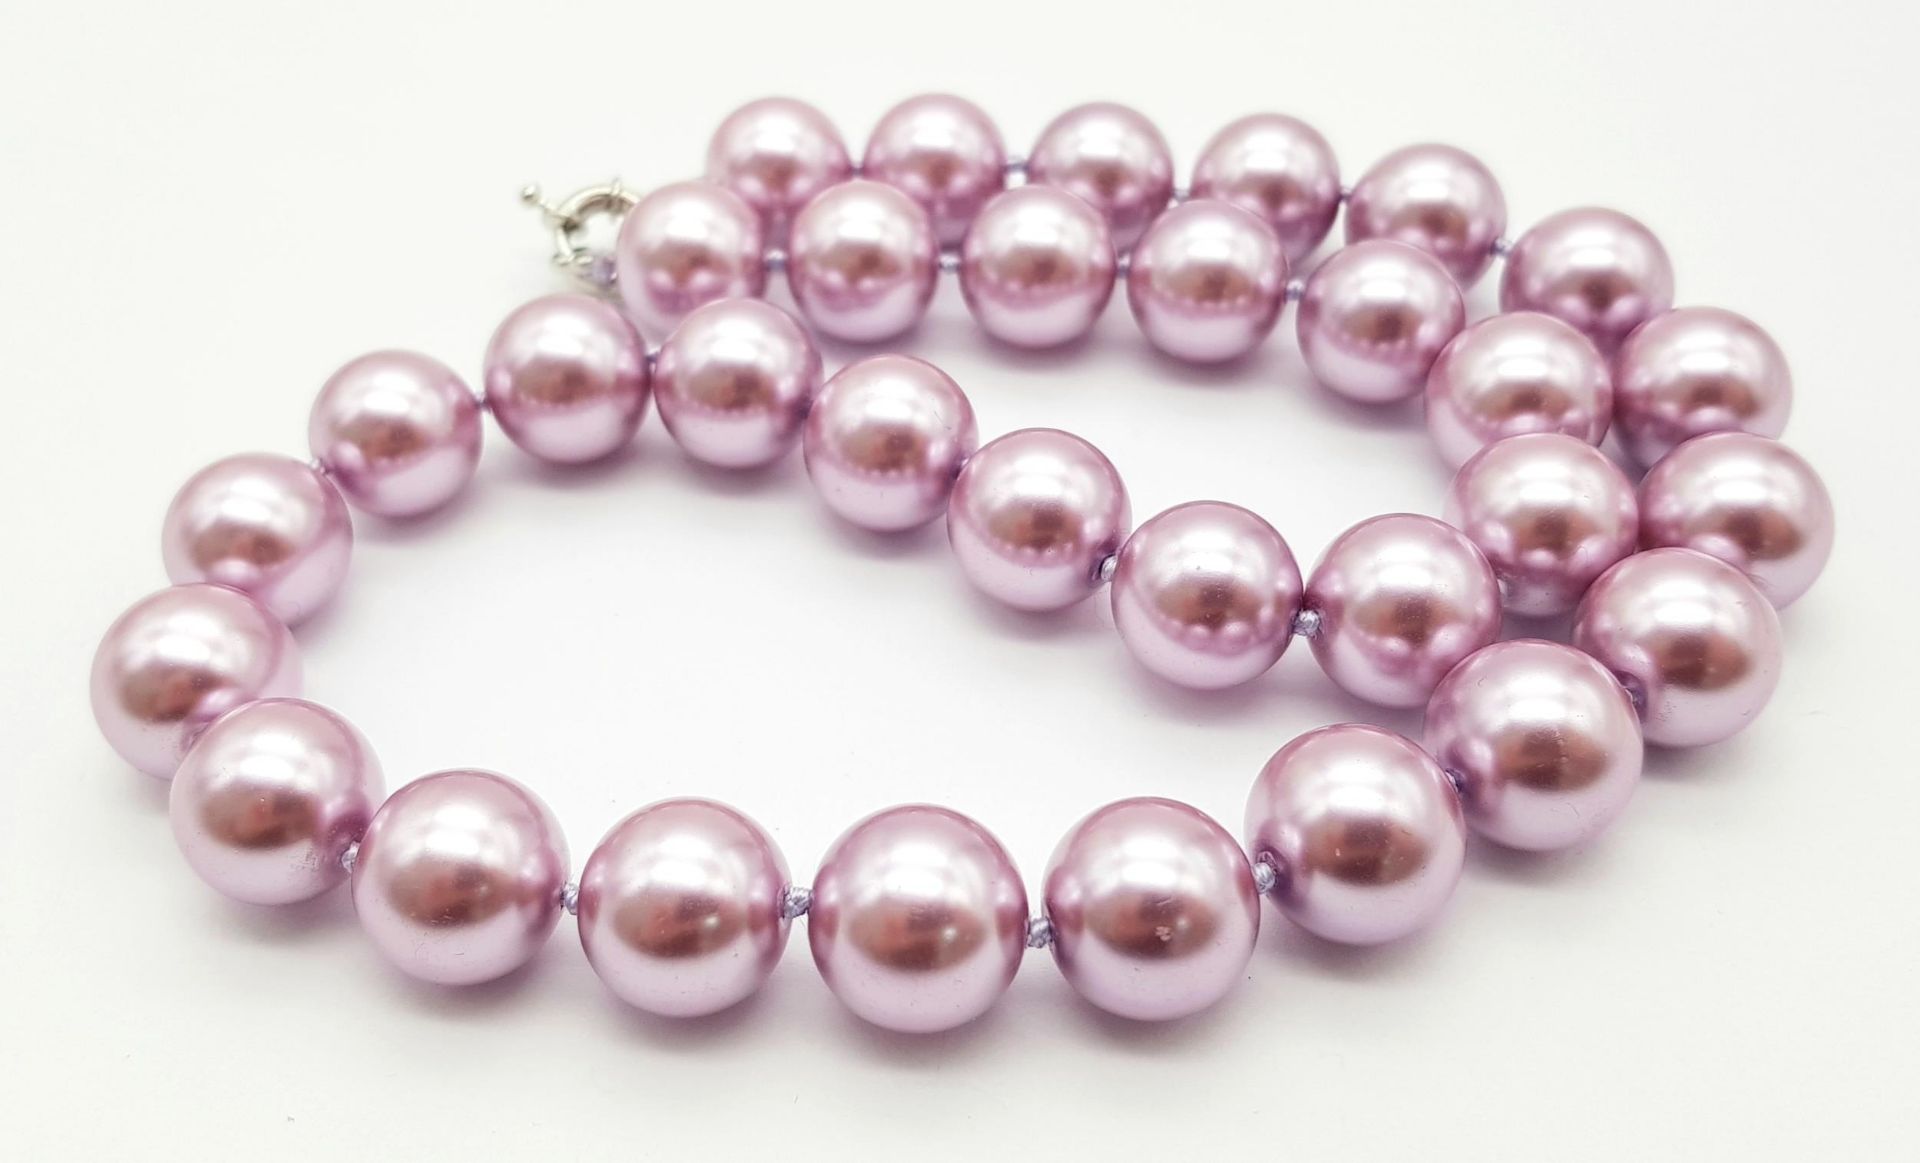 An Exotic Lavender South Sea Pearl Shell Beaded Necklace. 14mm beads. 44cm necklace length - Image 3 of 4